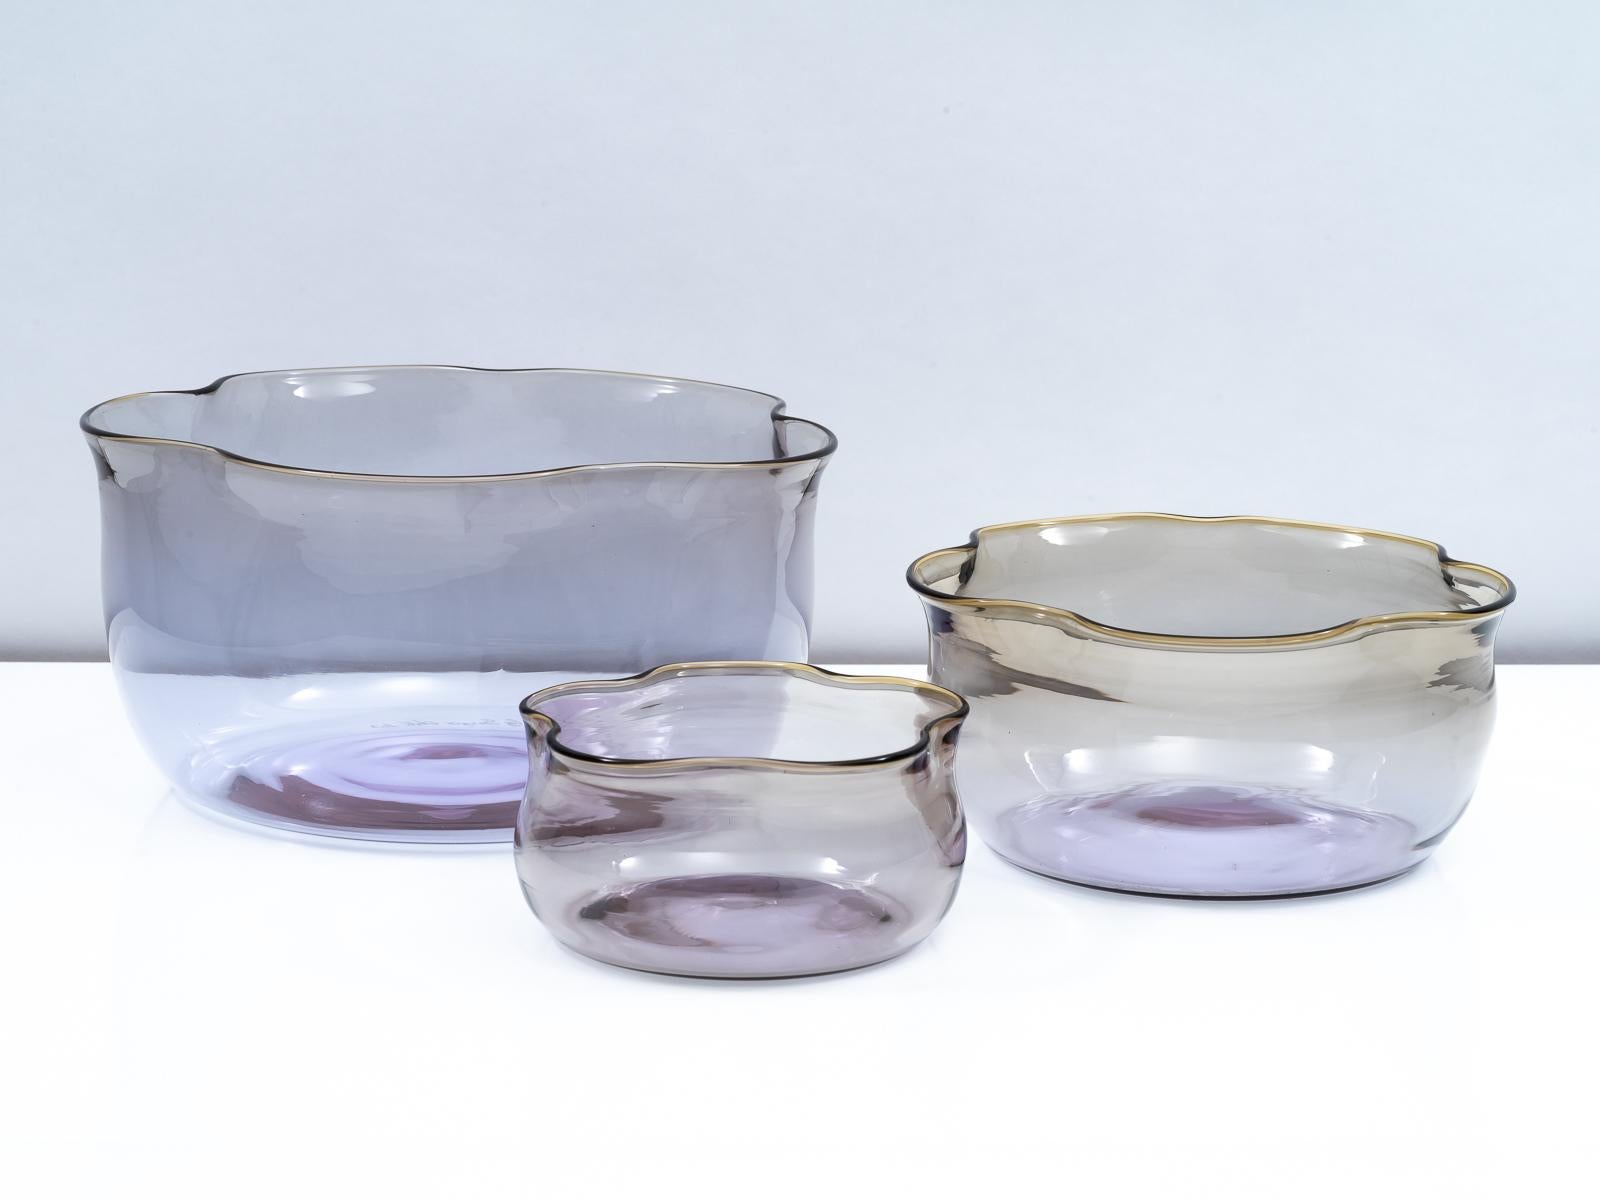 Stunning set of three blown glass nesting vases designed by Sergio Asti for Salviati in 2003. Each vase has a light purple alexandrite base that delicately transitions to grey ochre at the upper rim. Can be nested for a unique effect or displayed